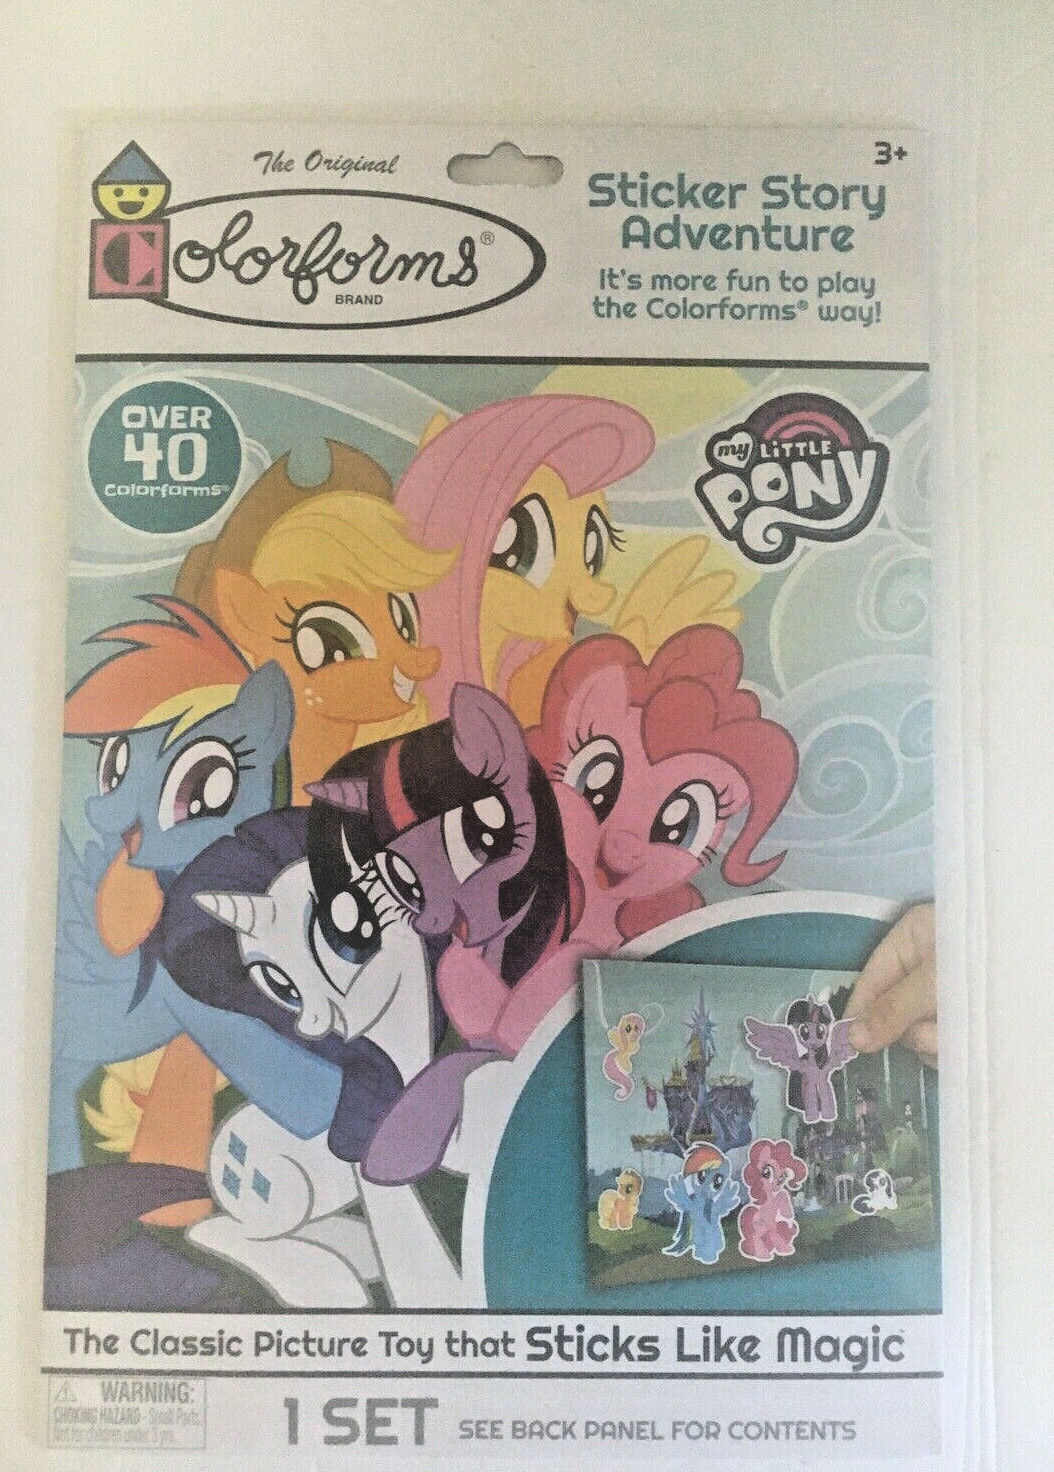 Lot Of 3 Colorforms Disney Mickey Frozen 2 My Little Pony Over 40 Colorforms Colorforms - фотография #6